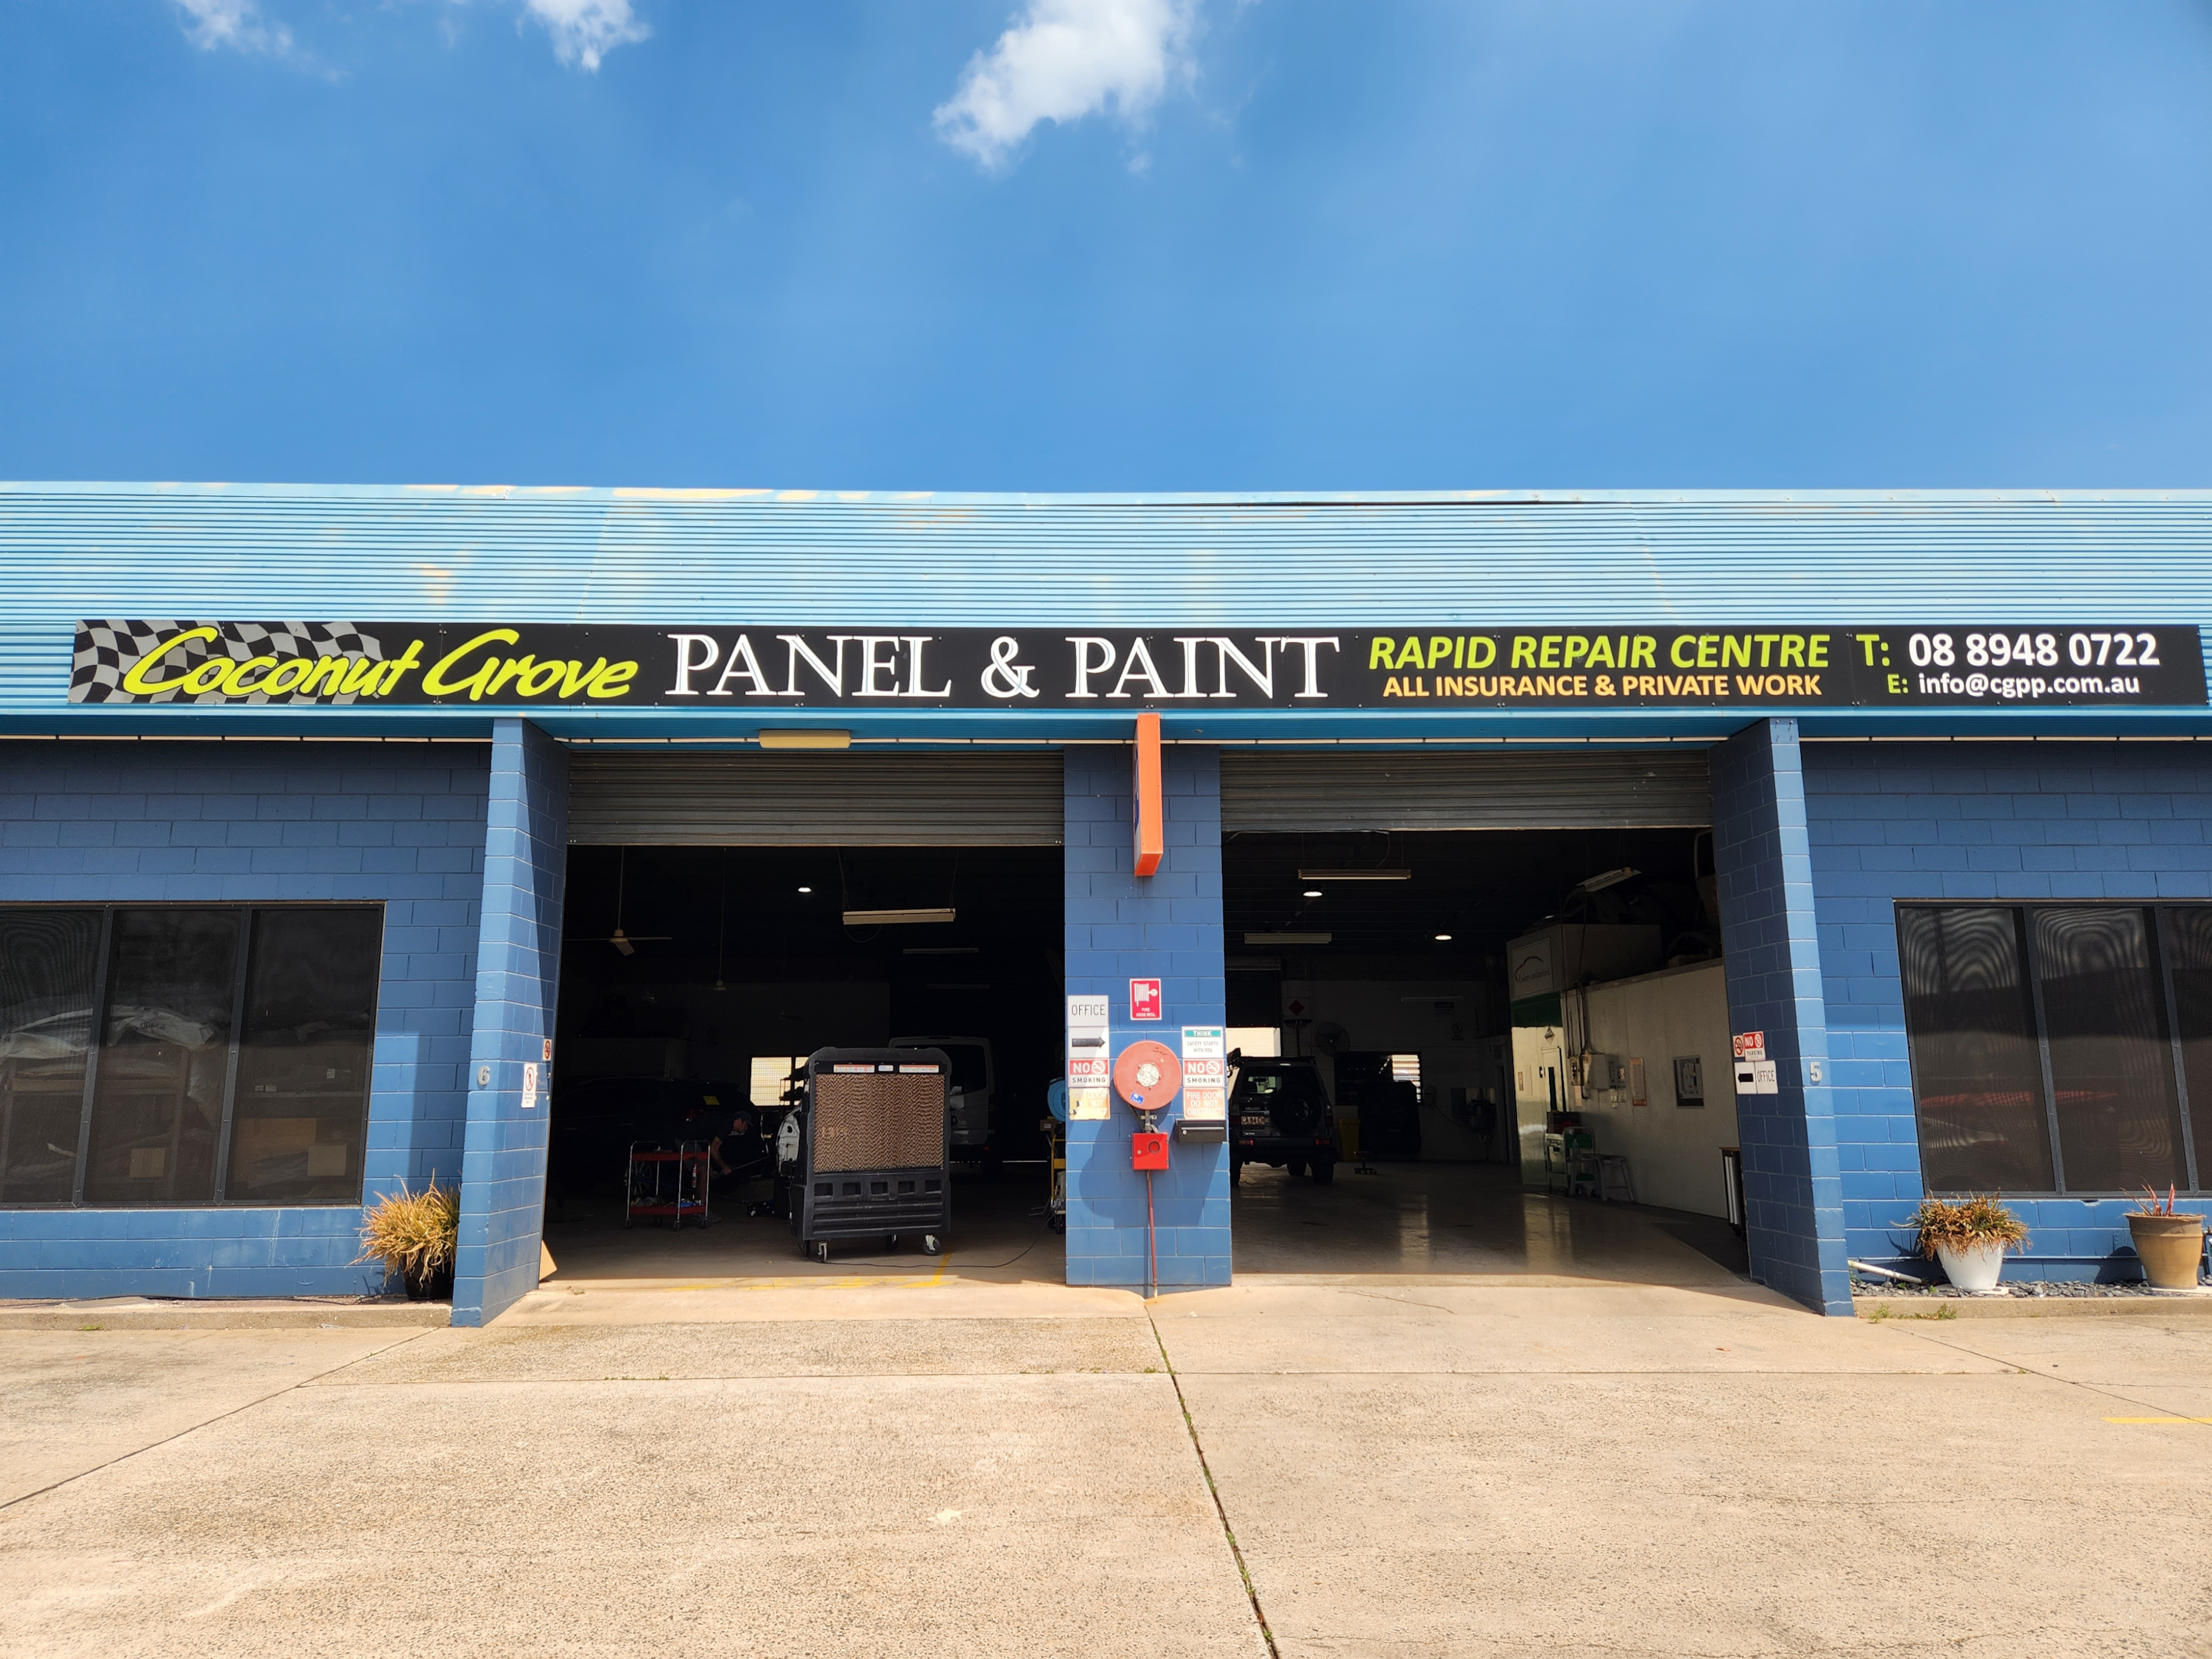 CGPP Car Repairs Shop - Expert automotive services with skilled technicians in a well-equipped workshop.